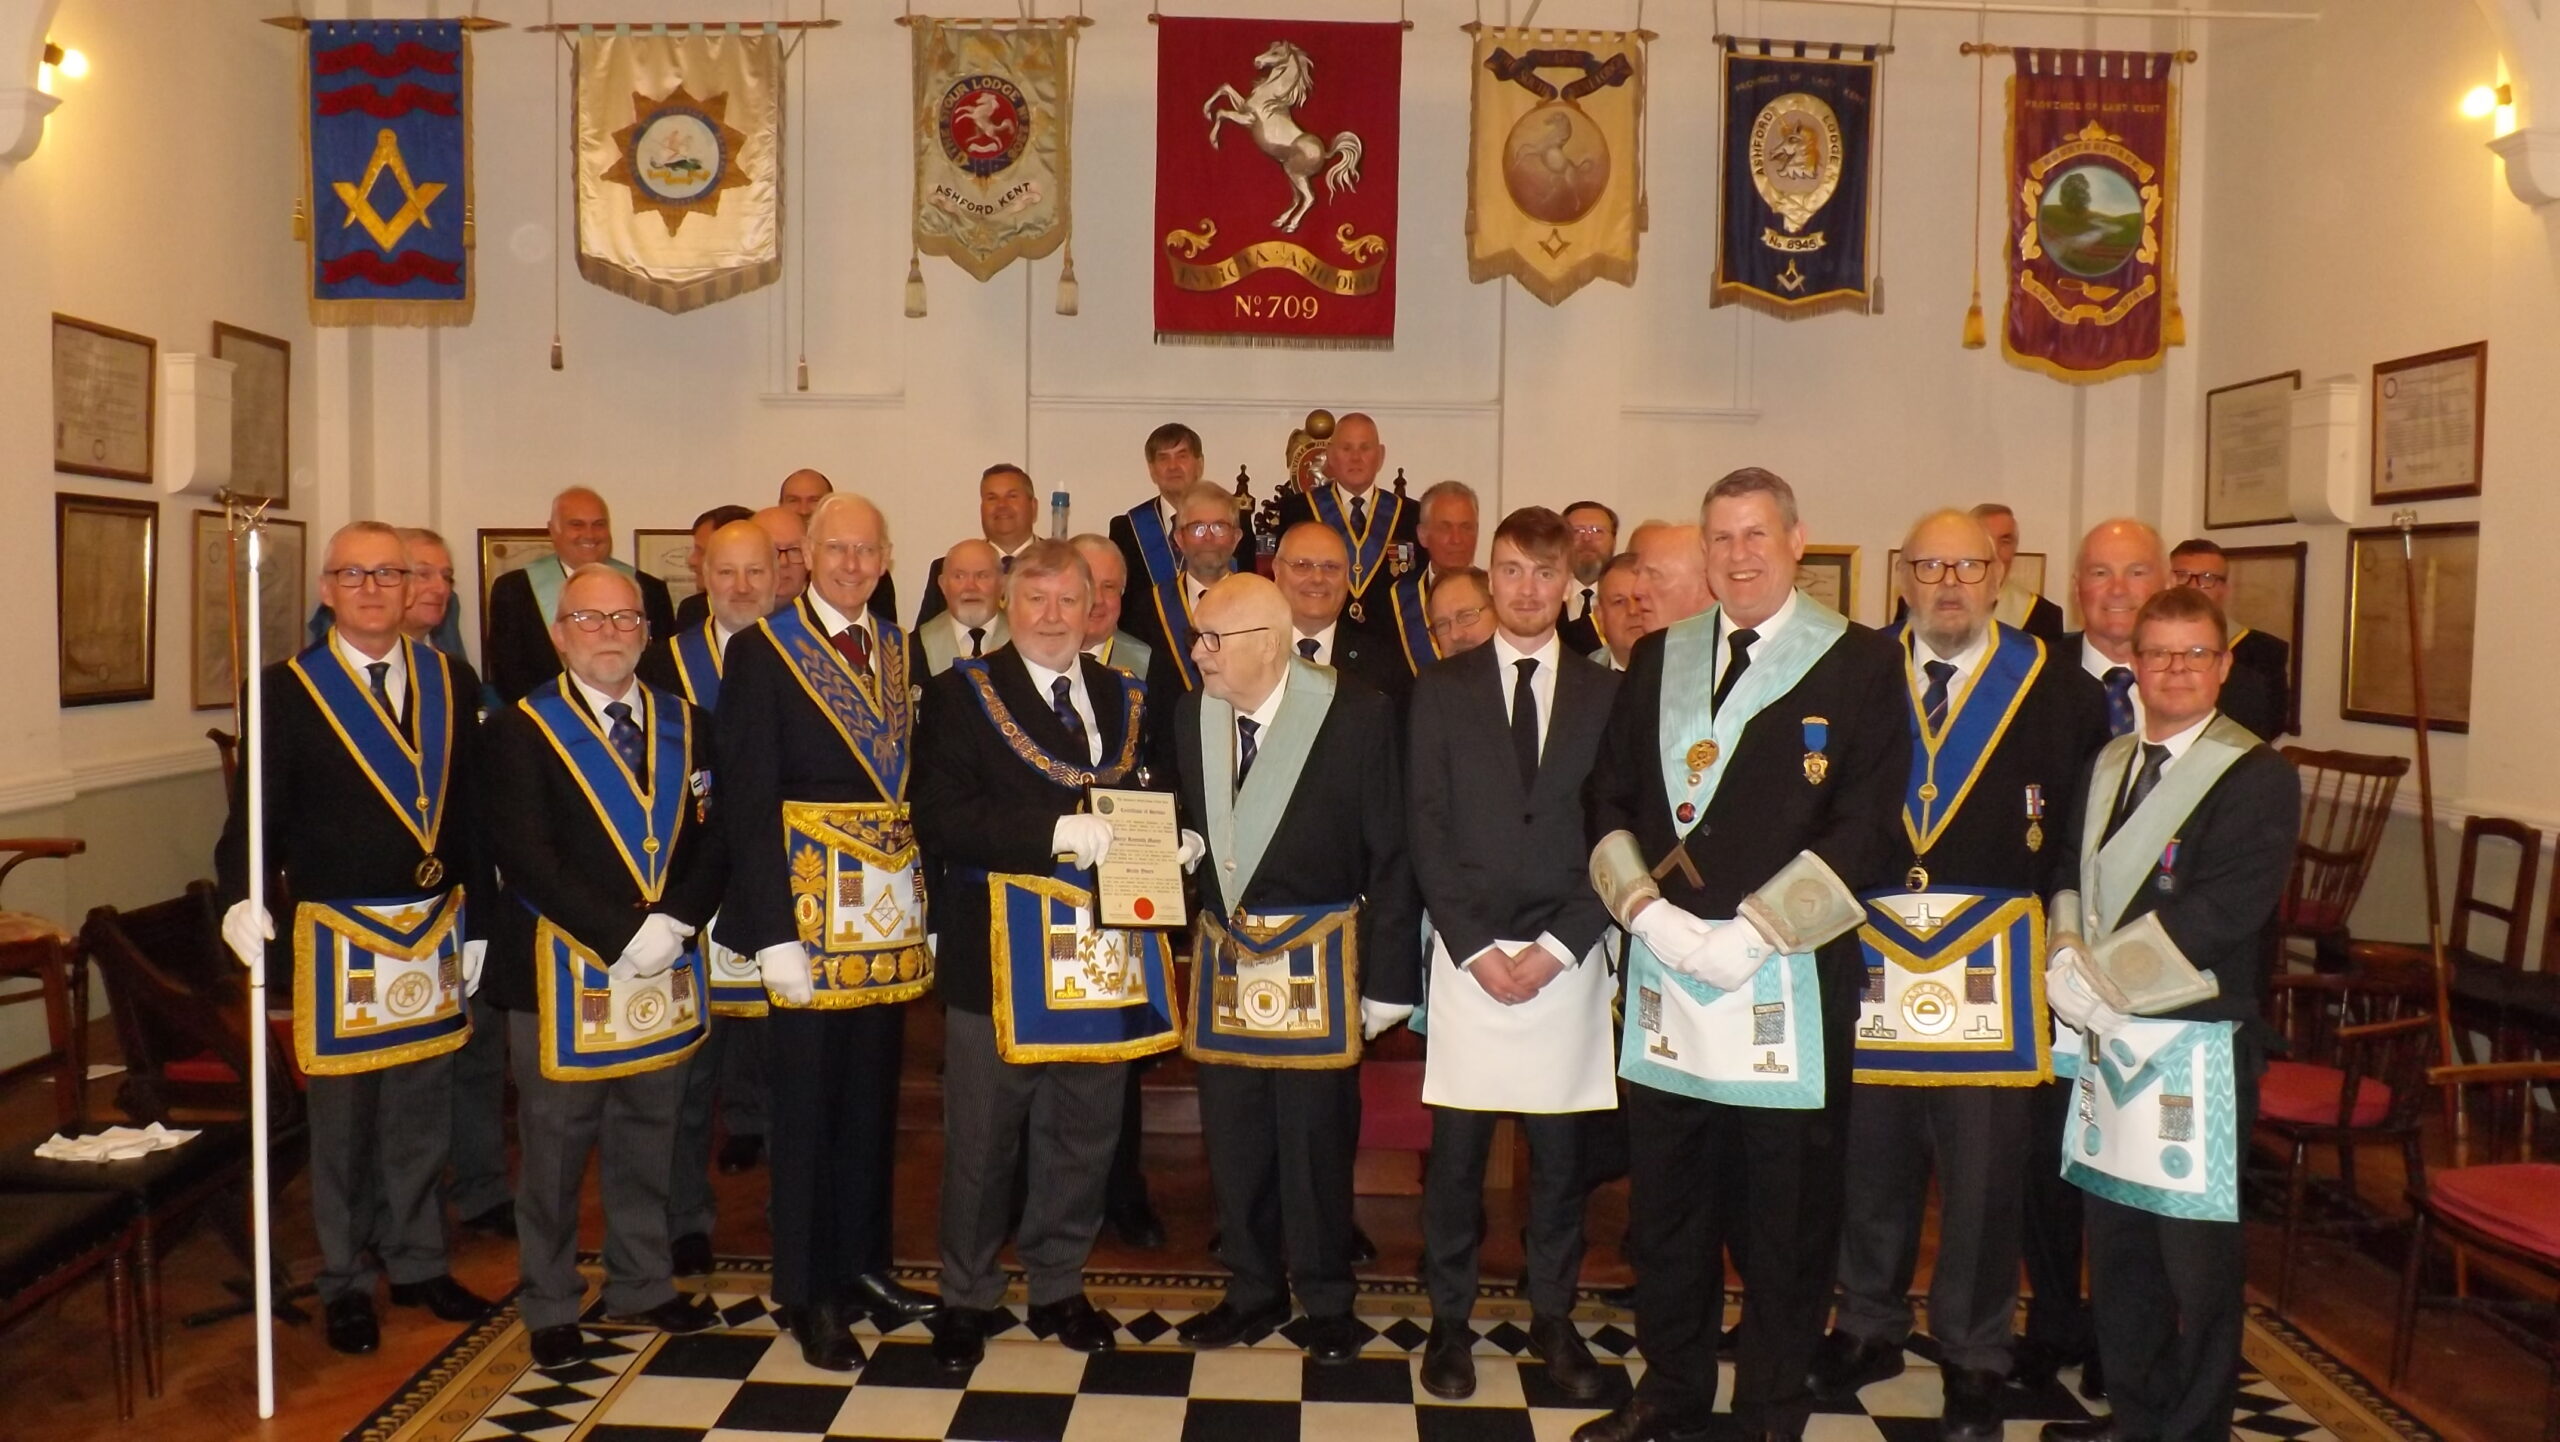 group photo of Matthew Harrison the new entrant with the recipient of the 60th Certificate along with members of the lodge and the Deputy Provincial Grand Master Phil South